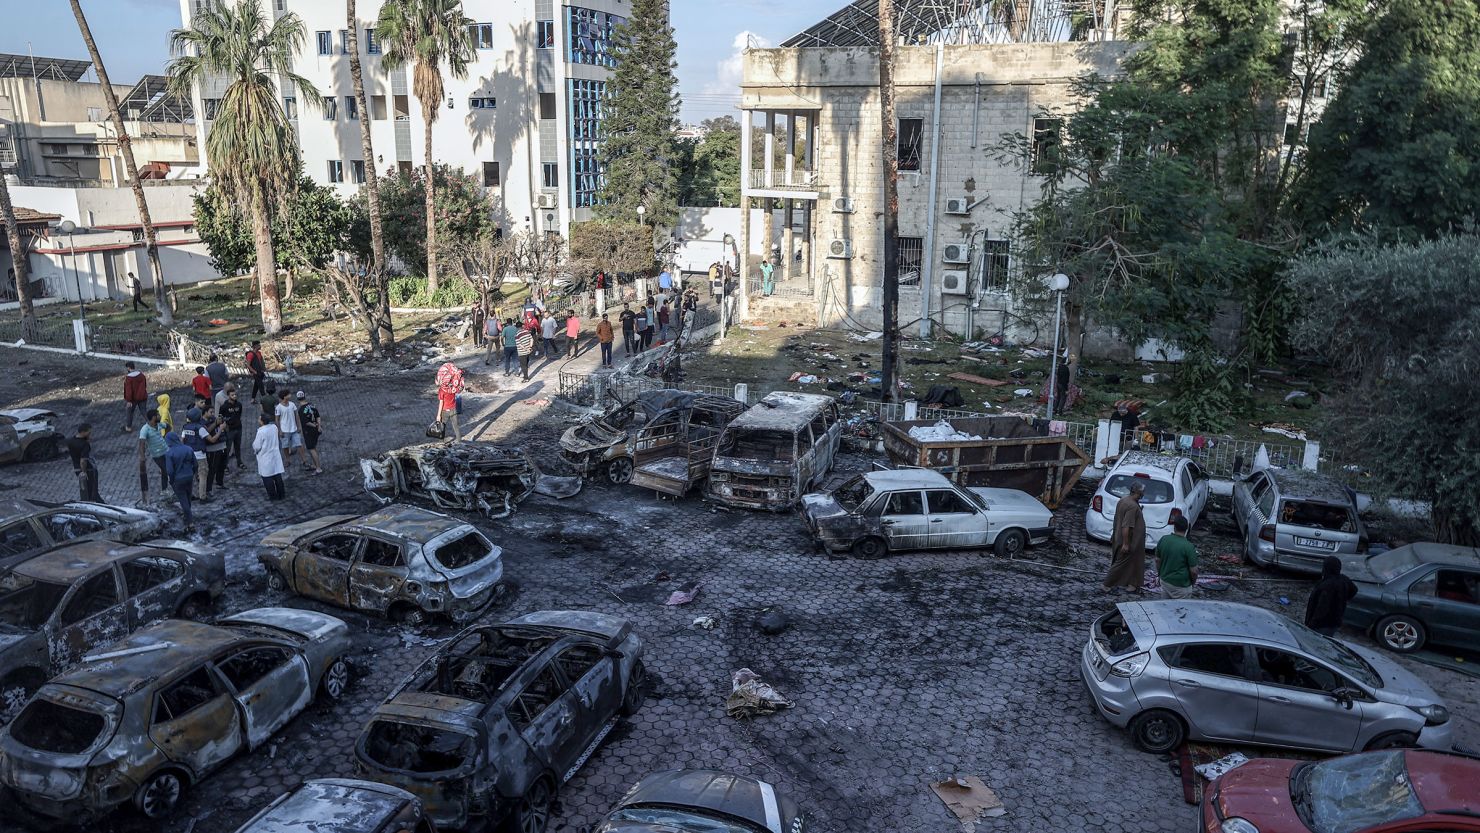 This view shows the aftermath of a deadly blast that struck Al-Ahli Baptist Hospital in Gaza City, on Wednesday, October 18.